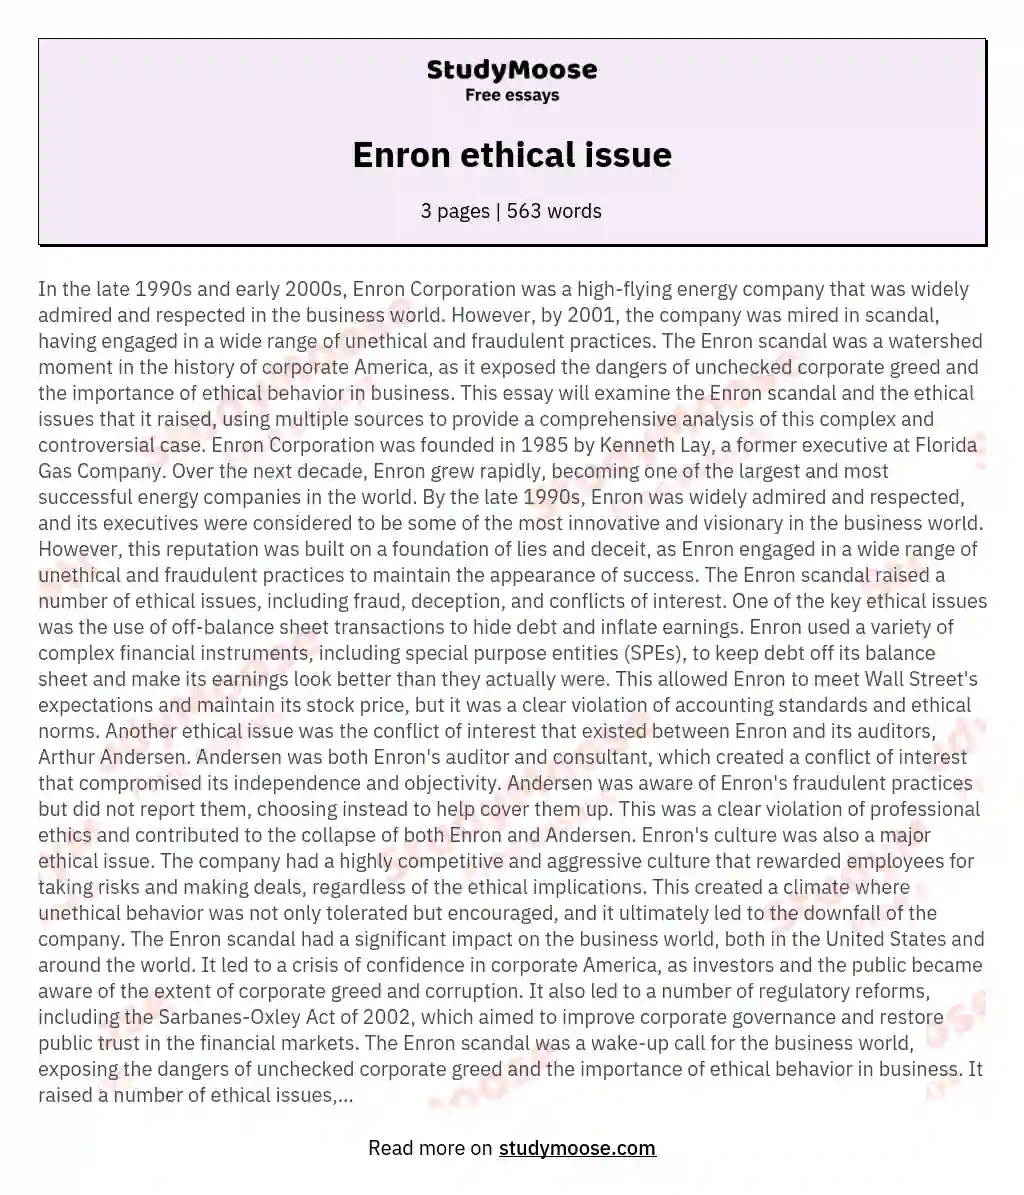 Enron ethical issue essay